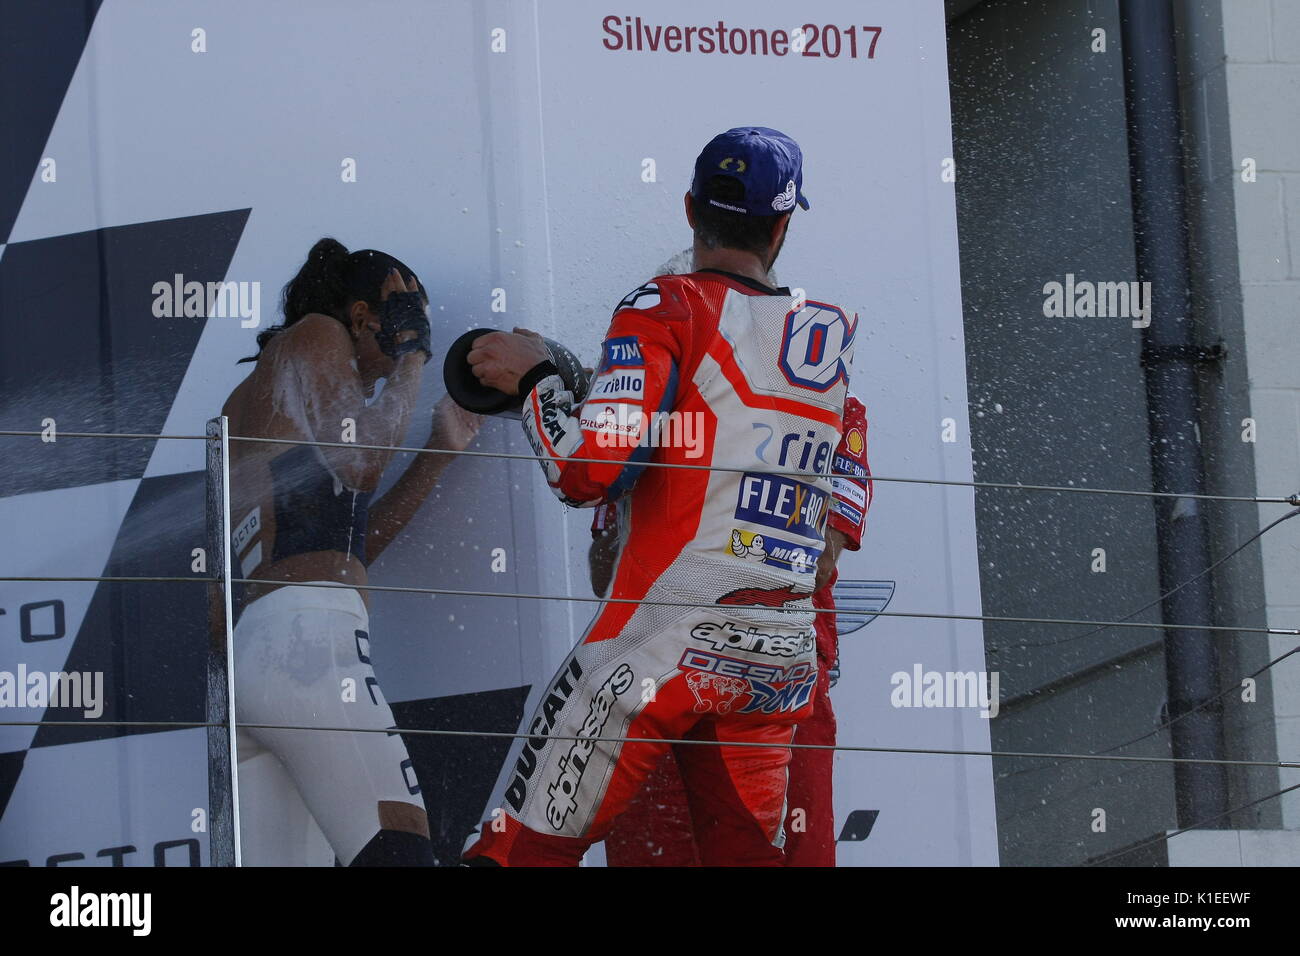 Silverstone, UK. 27th Aug, 2017. Now its the champagne girls! Winner  Dovizioso showers the OCTO promotion girl with bubbles after the OCTO  British MotoGP Credit: Motofoto/Alamy Live News Stock Photo - Alamy